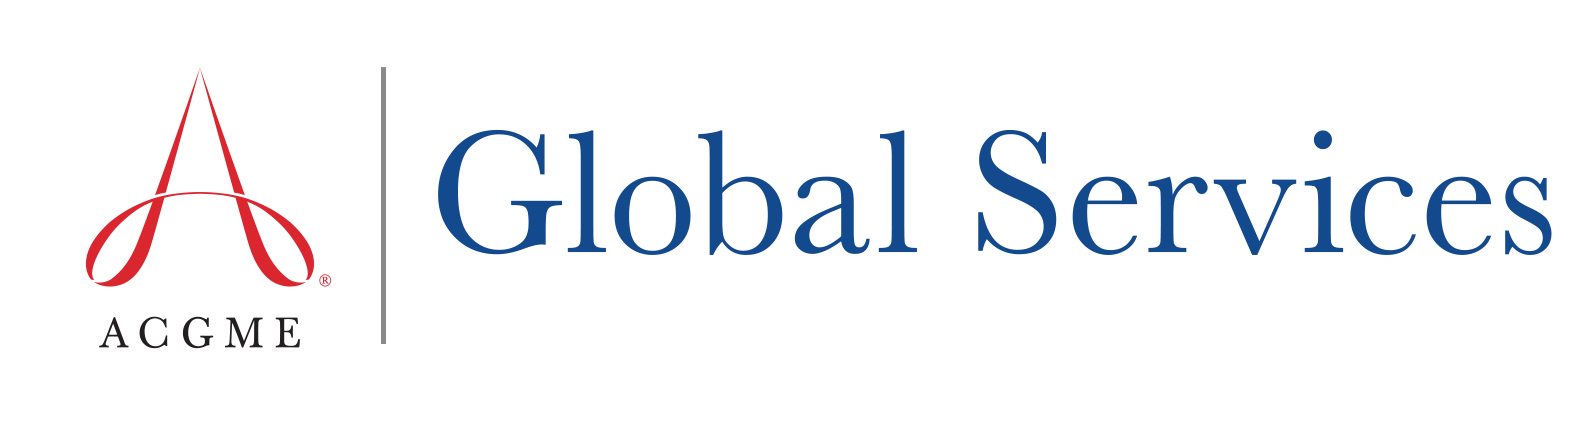 GlobalServices_ACGME_Logo_Horizontal.png